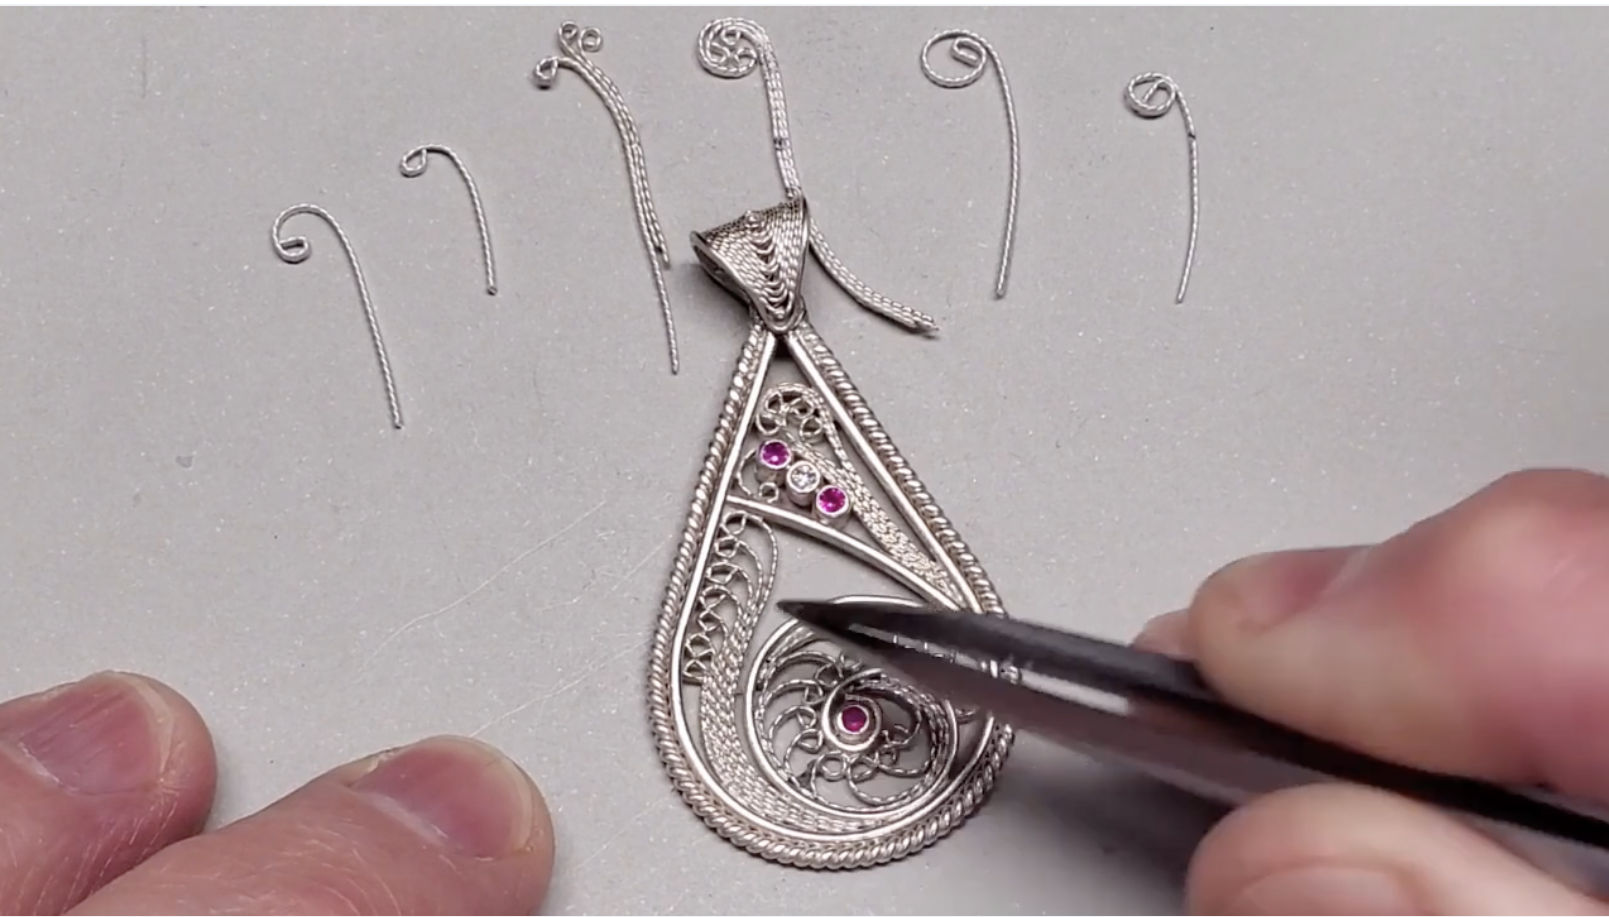 How to Make Filigree Shapes